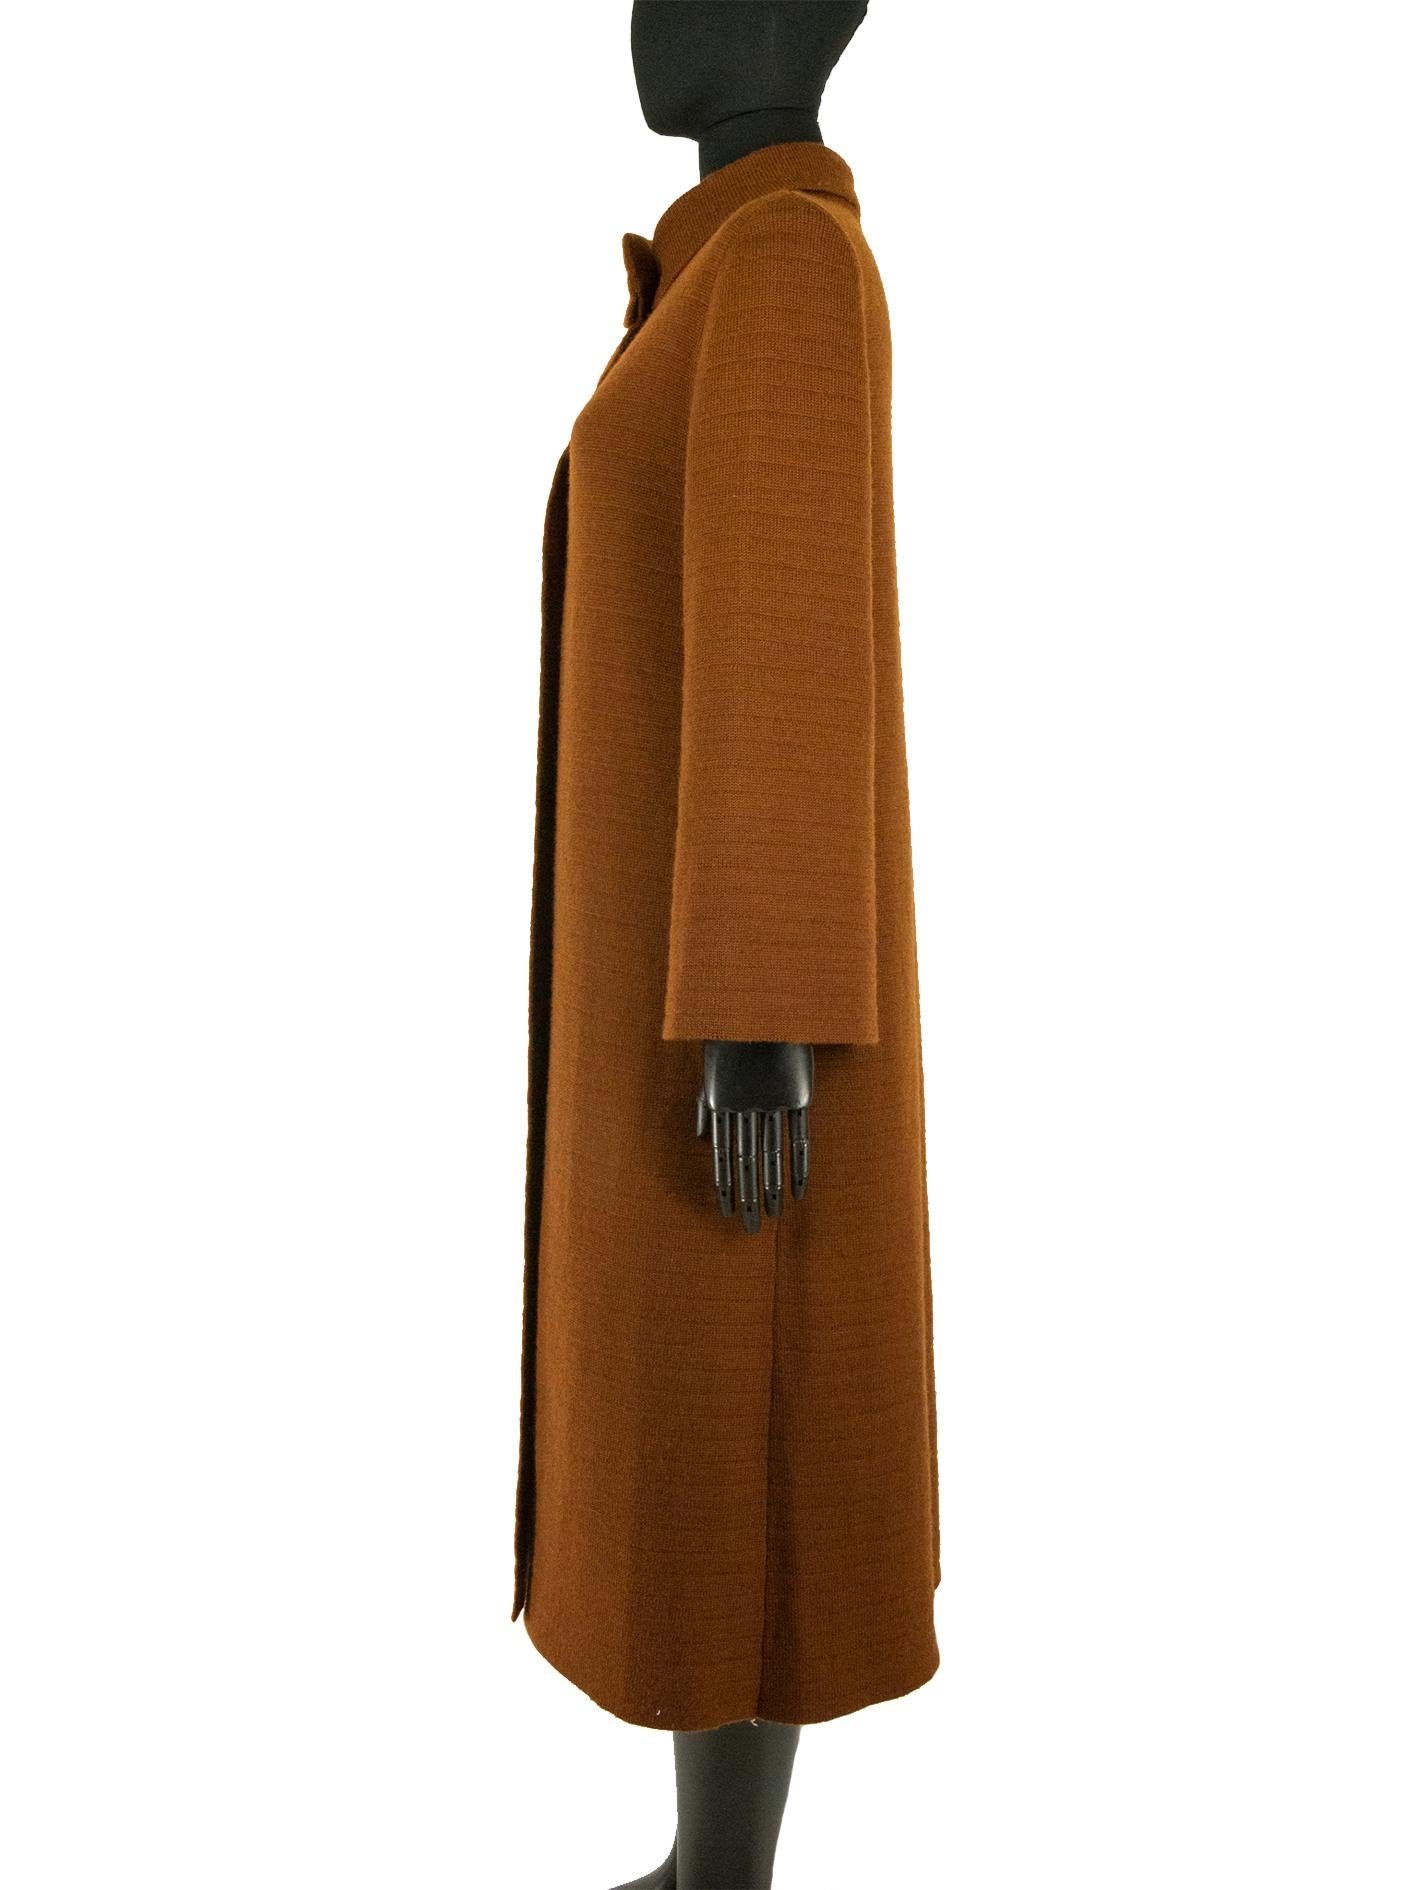 A brown Loewe coat made of virgin wool. This long wool coat features four self-covered buttons going down the main bodice of the coat. An asymmetric folded collar is a key feature of this coat, joined together with a singular hook and eye fastening.